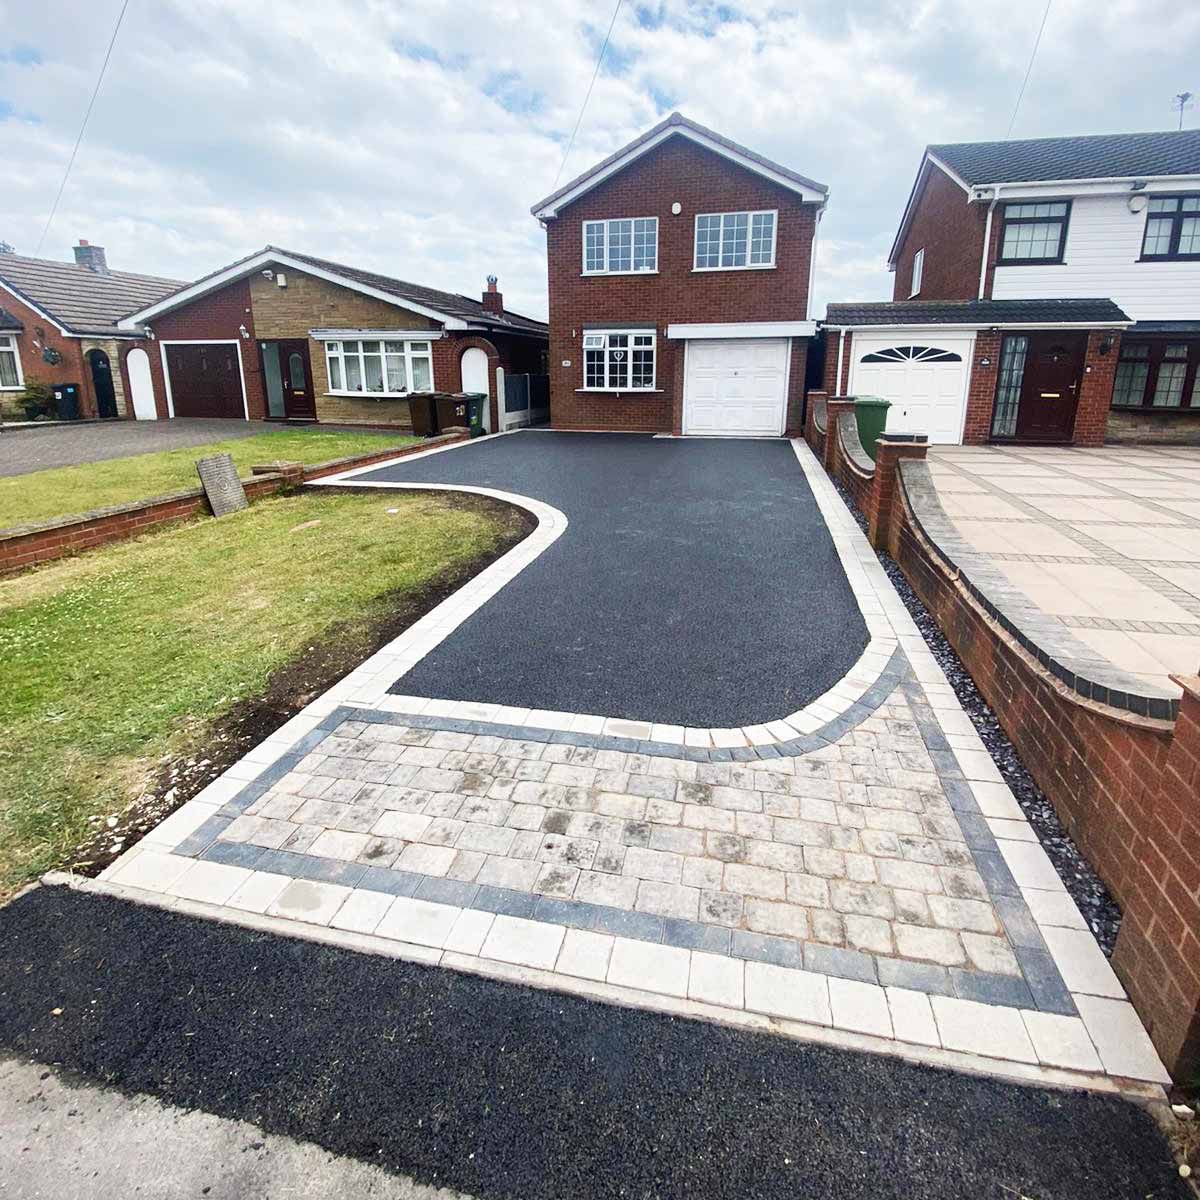 This is a photo of a Resin bound driveway in Preston.The installation was done by Preston Resin Driveways